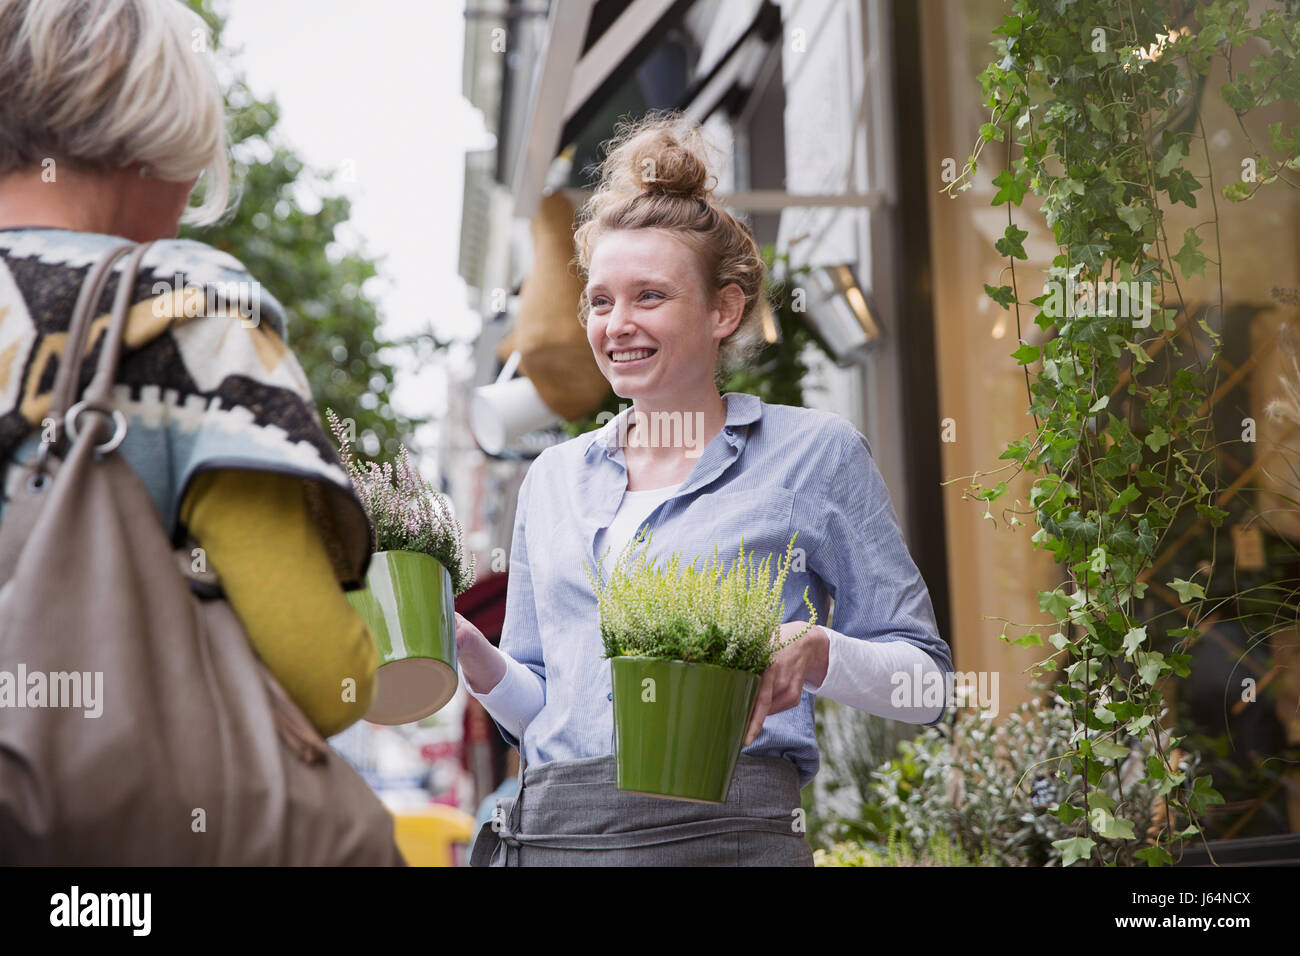 Florist showing plants to female shopper at storefront Stock Photo